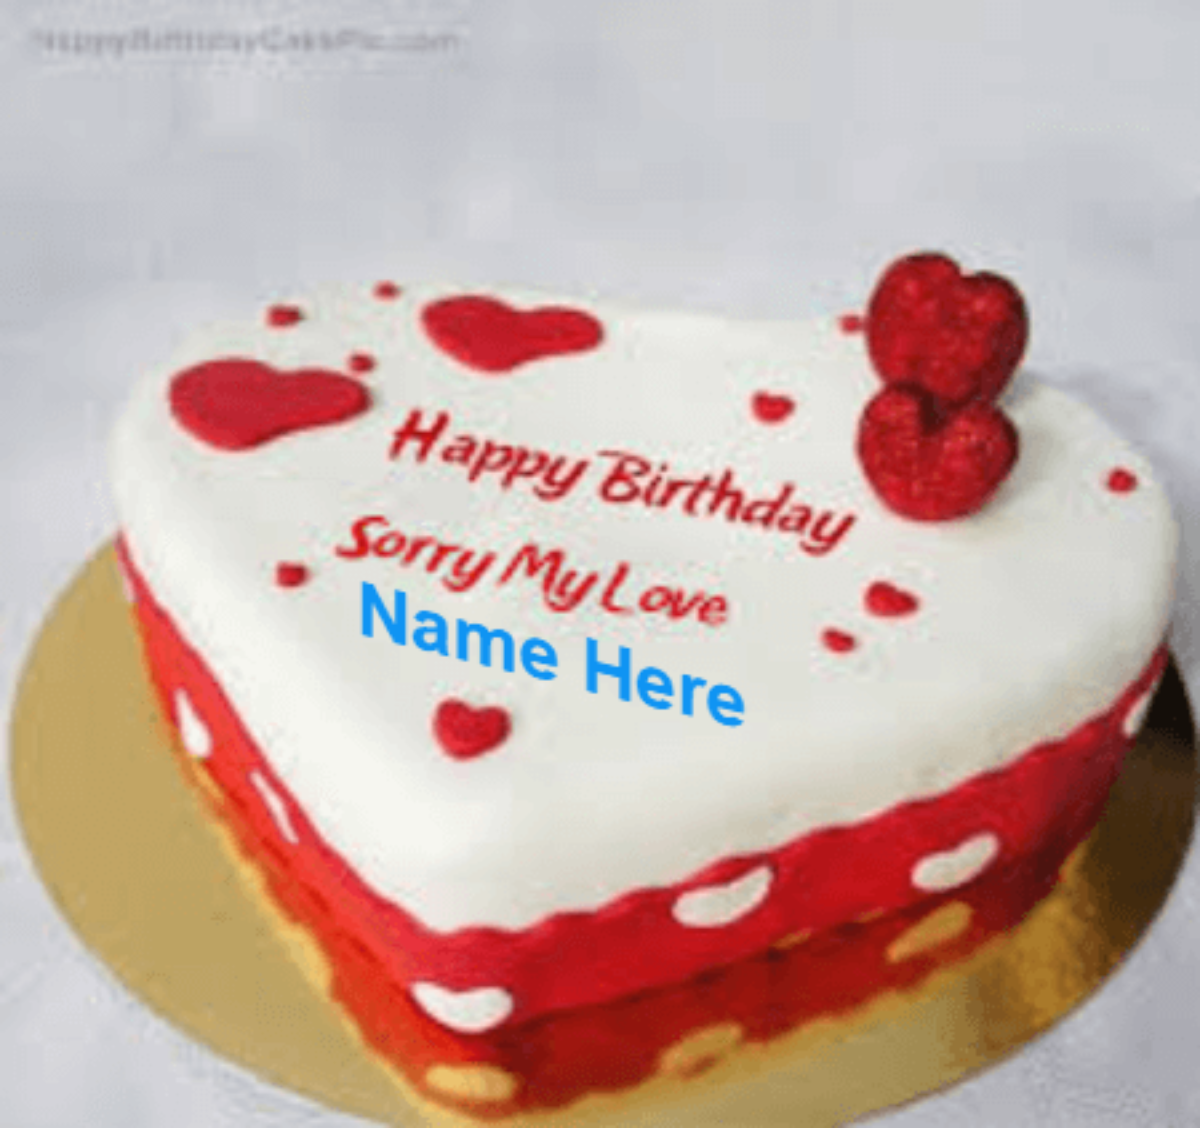 Sorry My Love Cake - Heart Touching Sorry Images and Messages